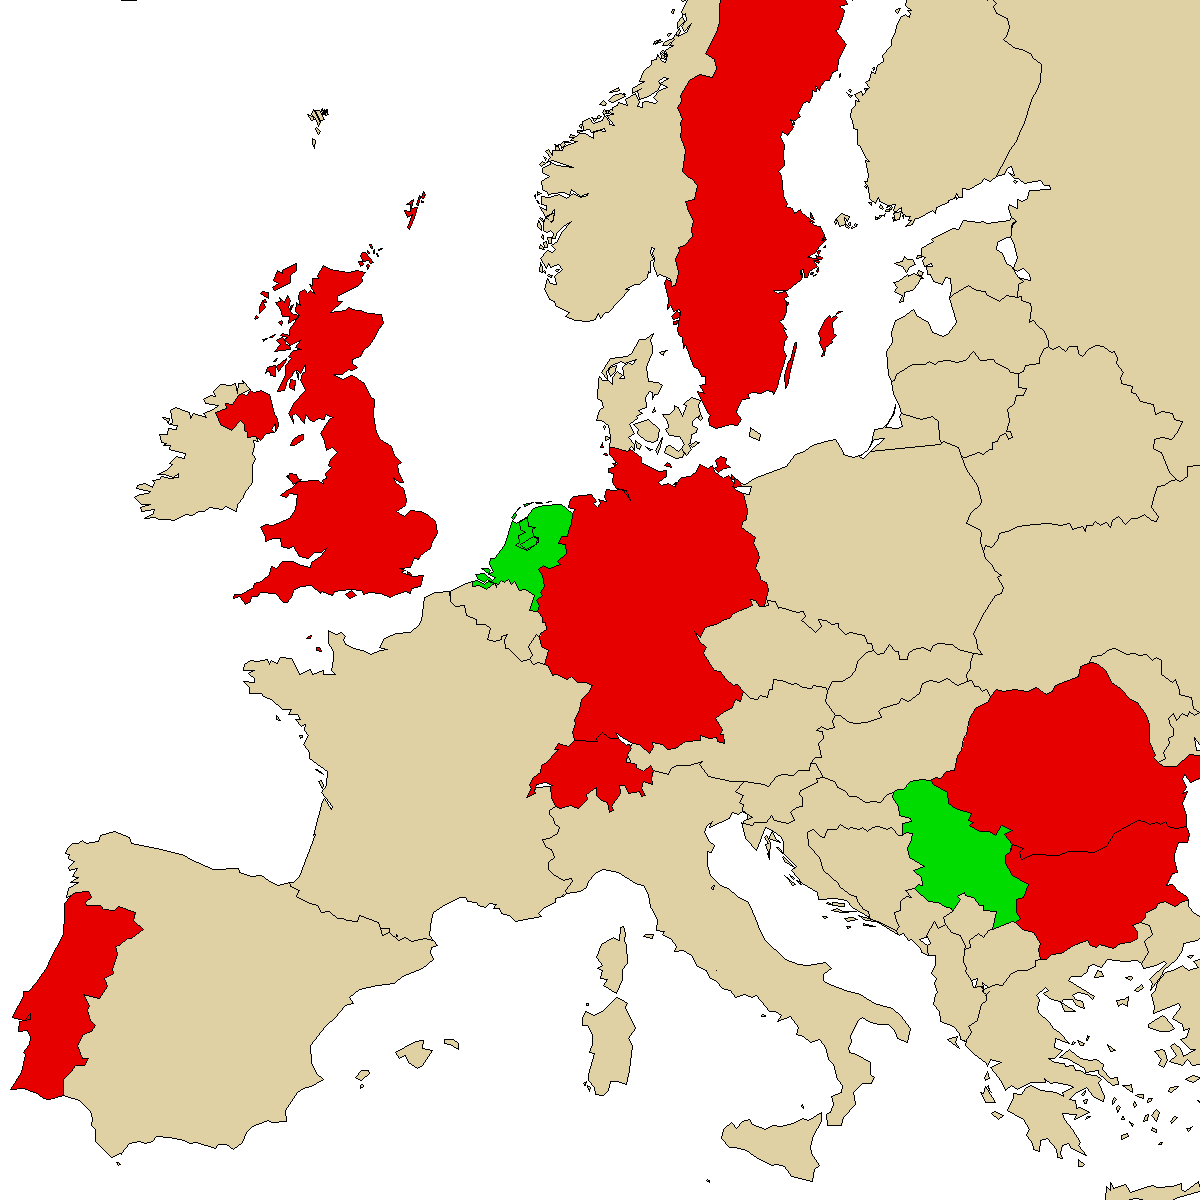 legal info map for our product NEP, green are countries with no ban, red with ban, grey is unknown